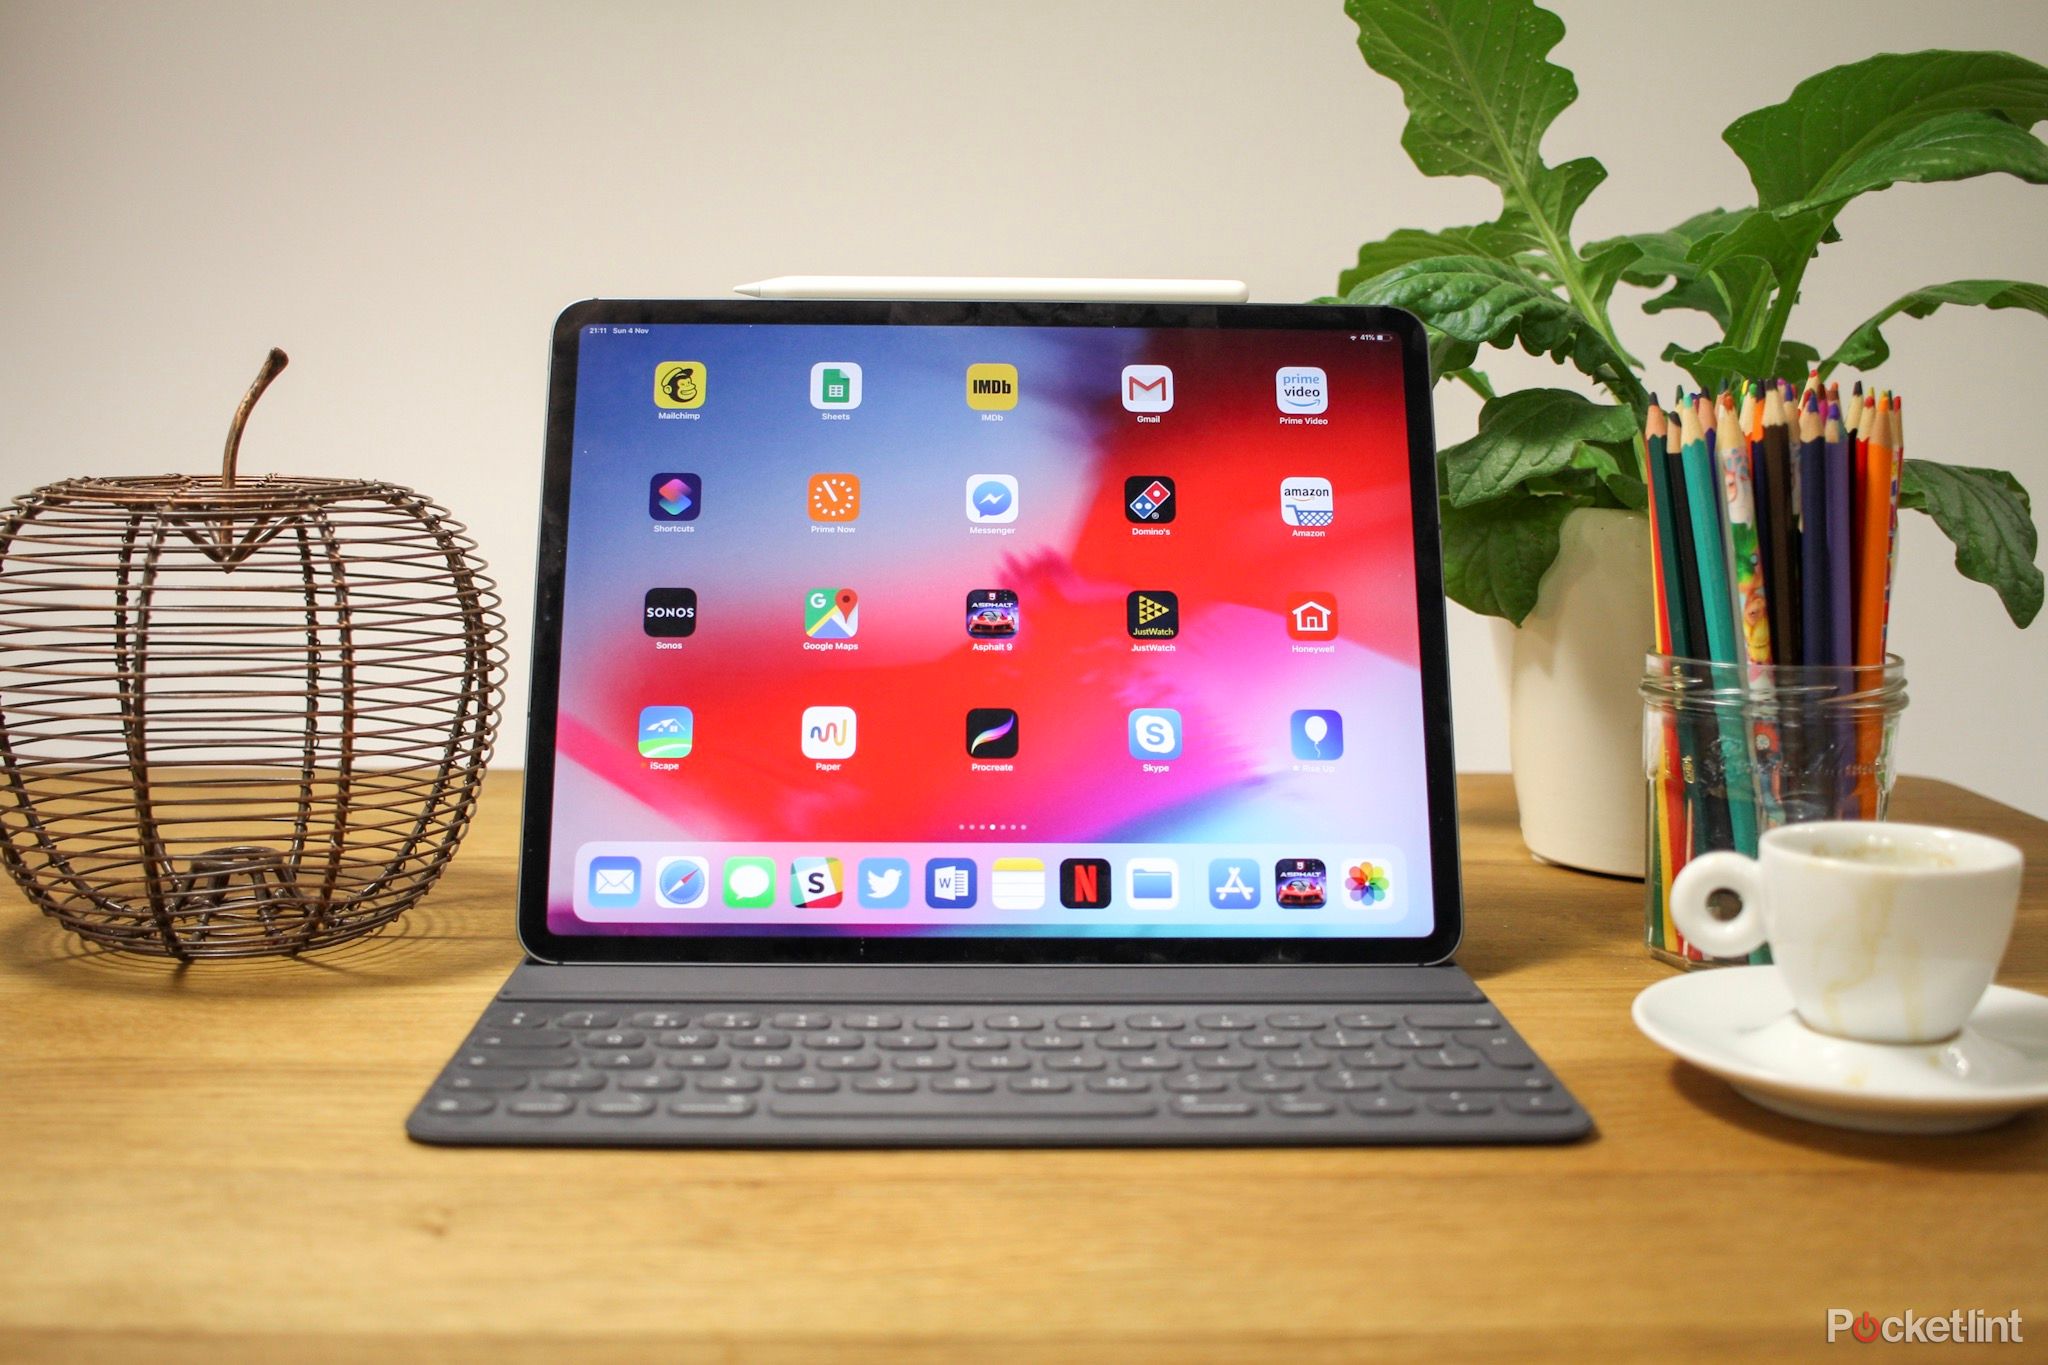 iOS 14 points to more advanced cursor support and new iPad keyboards